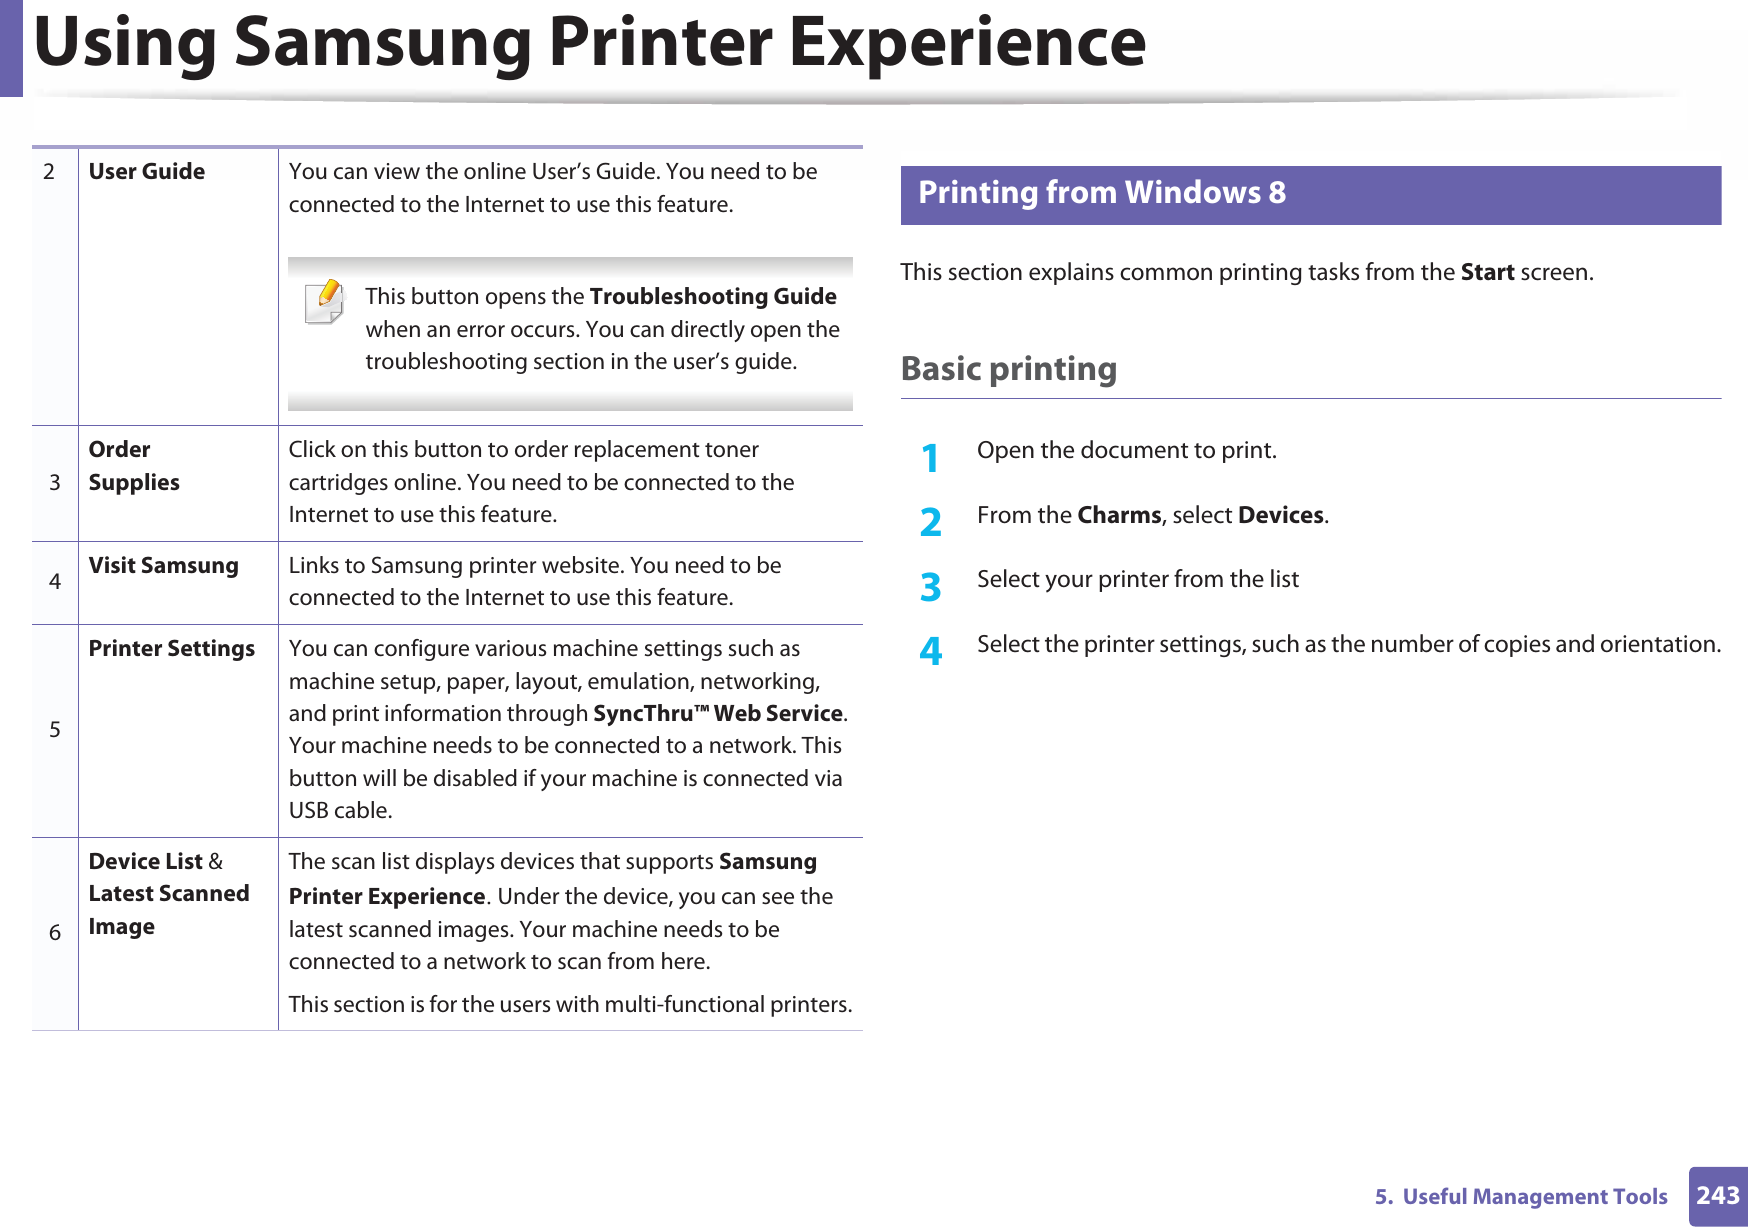 Using Samsung Printer Experience2435.  Useful Management Tools9 Printing from Windows 8This section explains common printing tasks from the Start screen.Basic printing1Open the document to print.2  From the Charms, select Devices.3  Select your printer from the list4  Select the printer settings, such as the number of copies and orientation.2User Guide You can view the online User’s Guide. You need to be connected to the Internet to use this feature. This button opens the Troubleshooting Guide when an error occurs. You can directly open the troubleshooting section in the user’s guide.  3Order SuppliesClick on this button to order replacement toner cartridges online. You need to be connected to the Internet to use this feature. 4Visit Samsung Links to Samsung printer website. You need to be connected to the Internet to use this feature.5Printer Settings You can configure various machine settings such as machine setup, paper, layout, emulation, networking, and print information through SyncThru™ Web Service. Your machine needs to be connected to a network. This button will be disabled if your machine is connected via USB cable.6Device List &amp; Latest Scanned ImageThe scan list displays devices that supports Samsung Printer ExperienceU Under the device, you can see the latest scanned images. Your machine needs to be connected to a network to scan from here. This section is for the users with multi-functional printers.